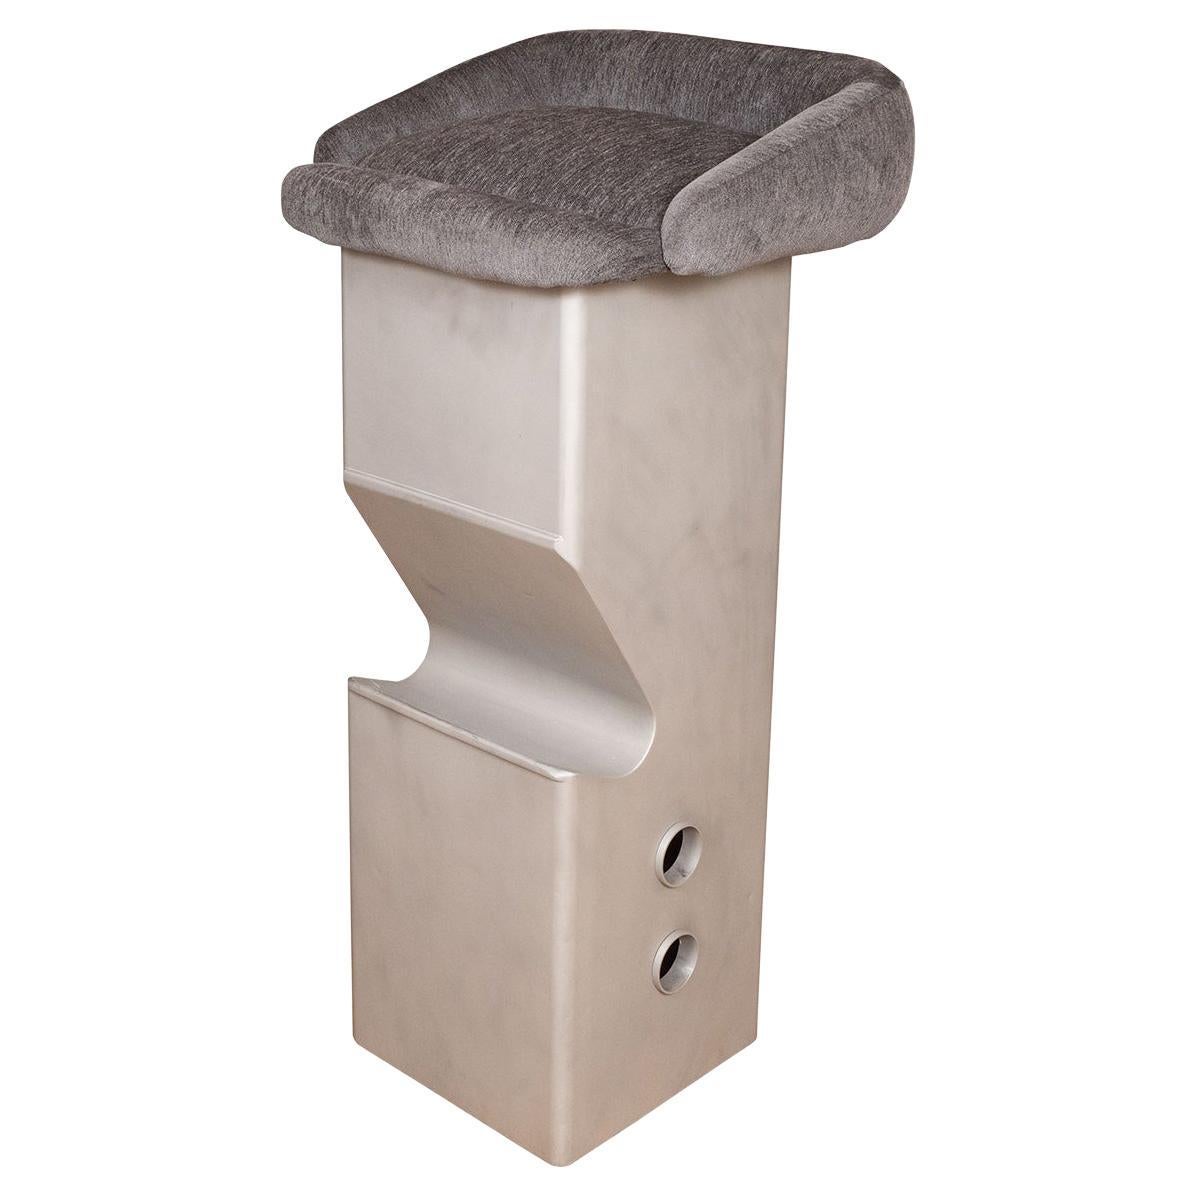 Sculptural Stainless Steel Bar Stool with Upholstered Seat